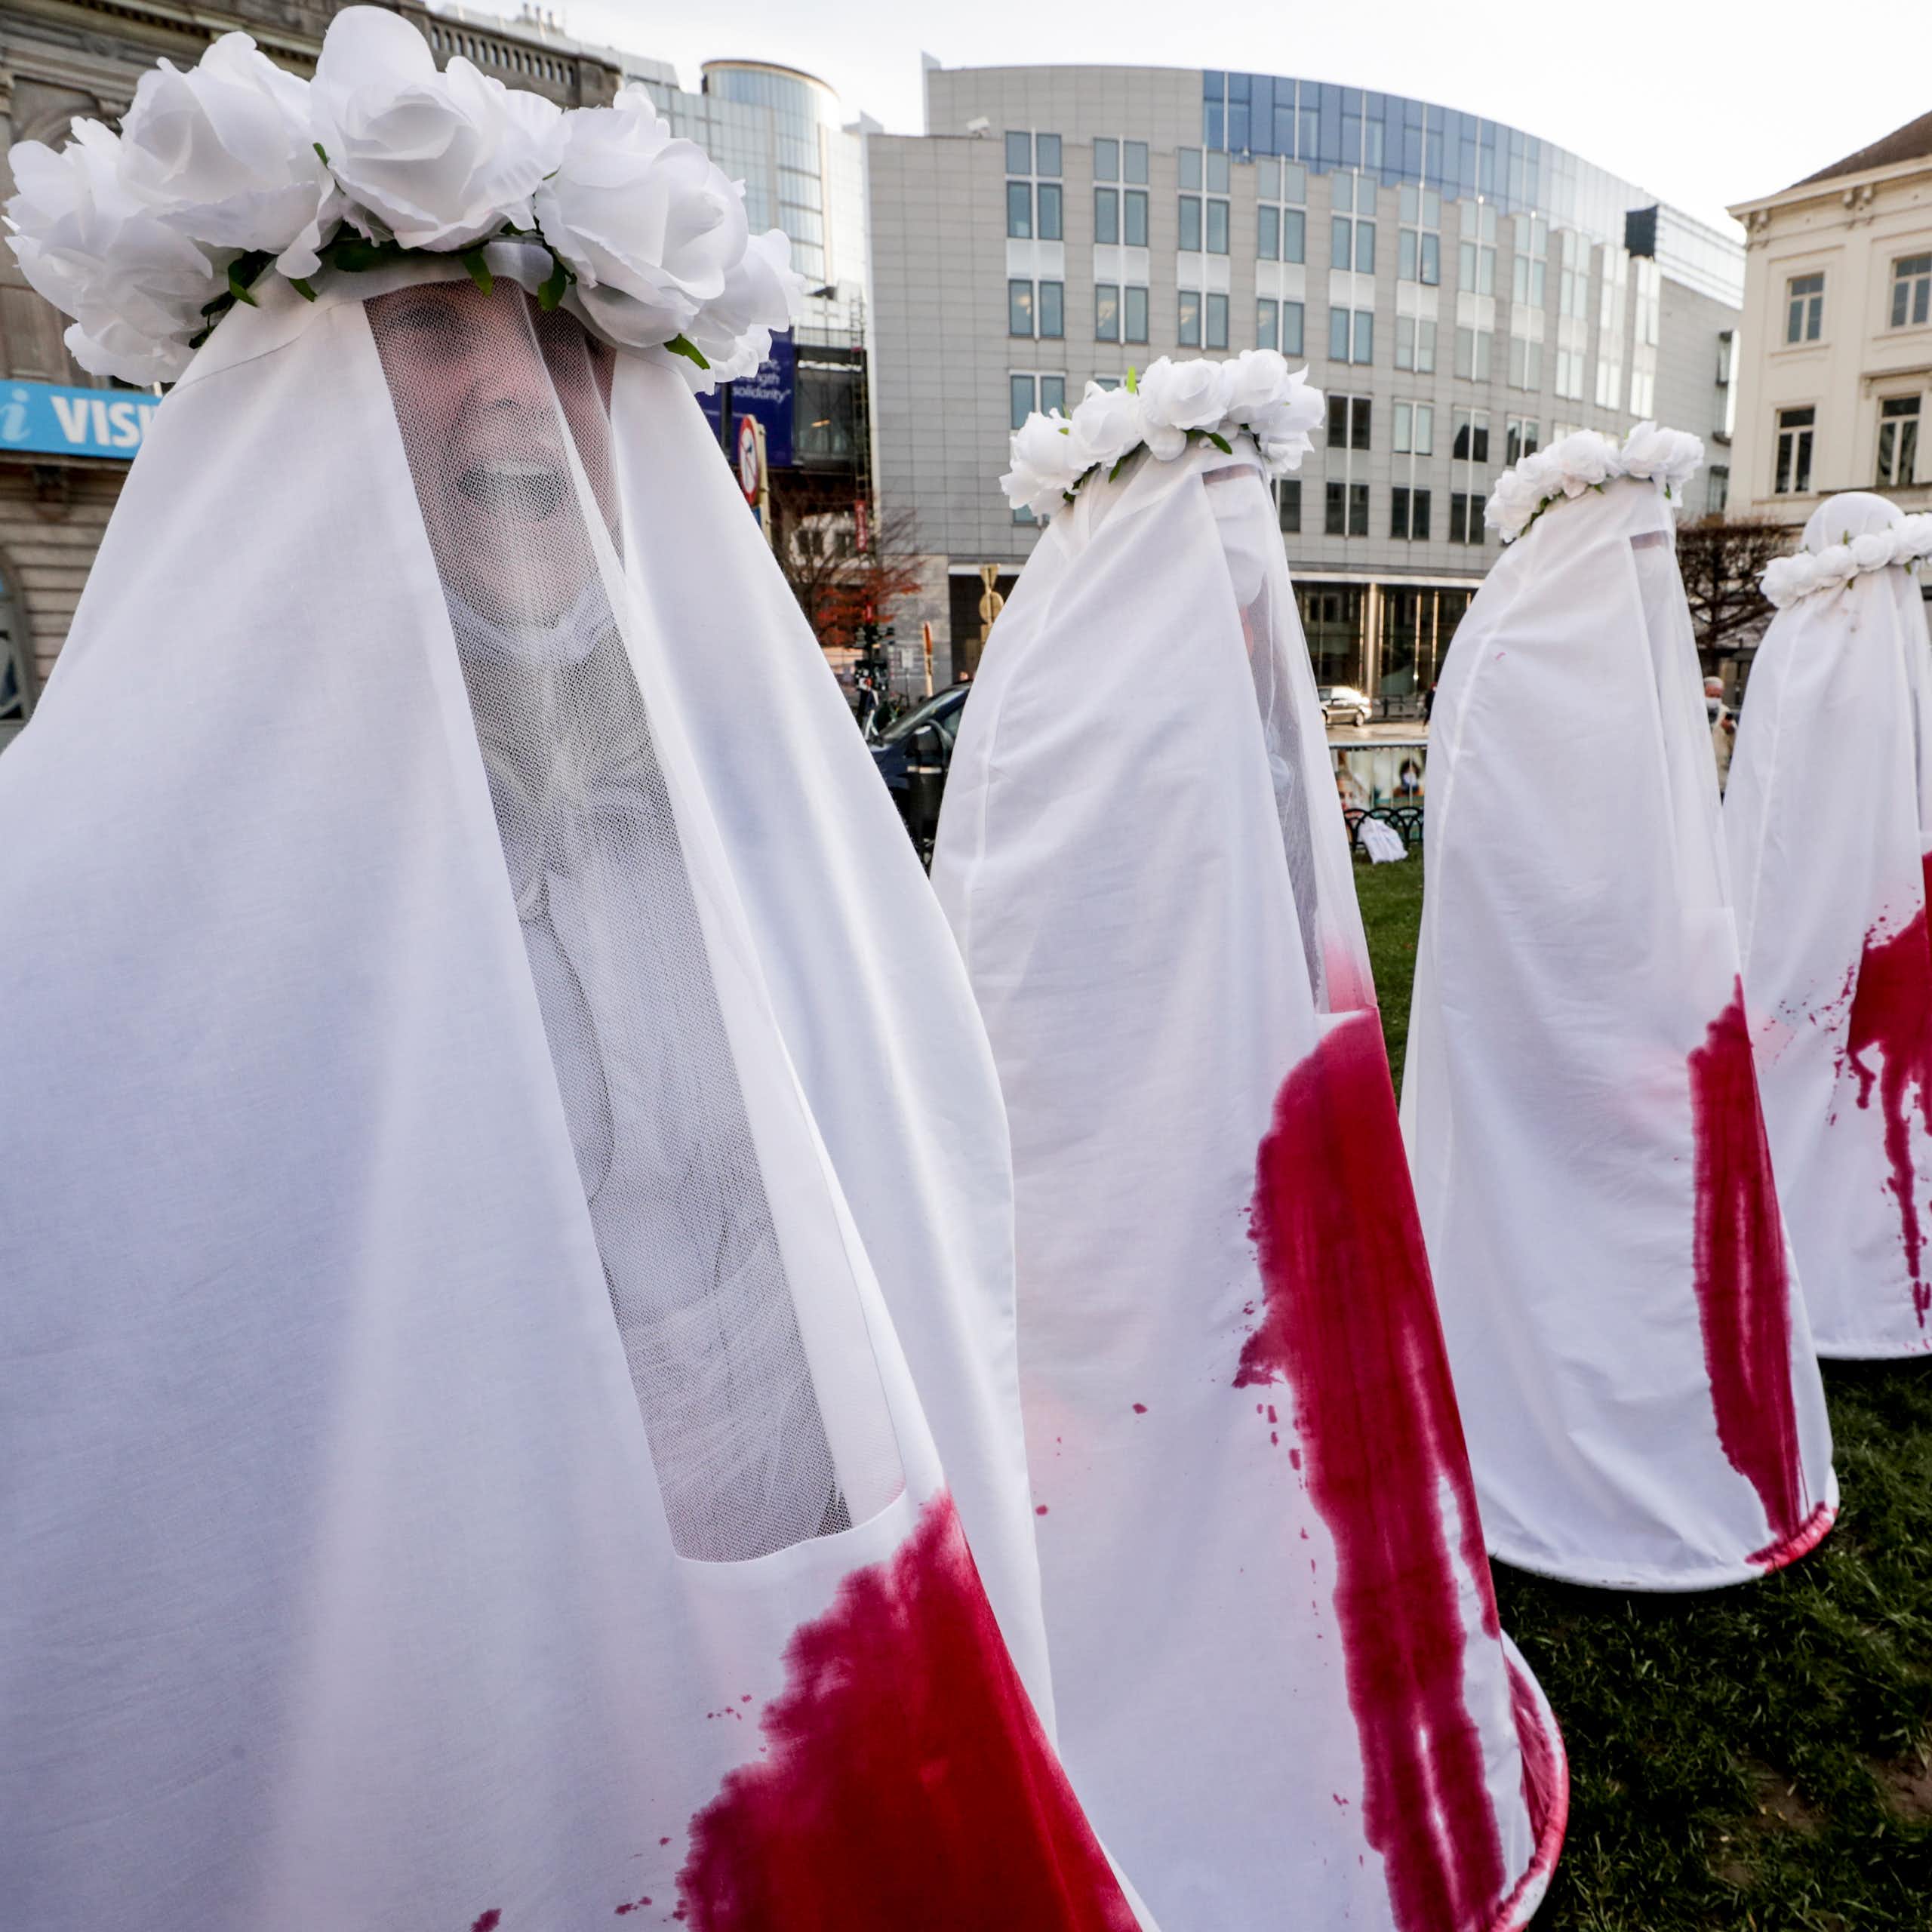 Women dressed in white costumes stained with blood stand in a line in Brussels.